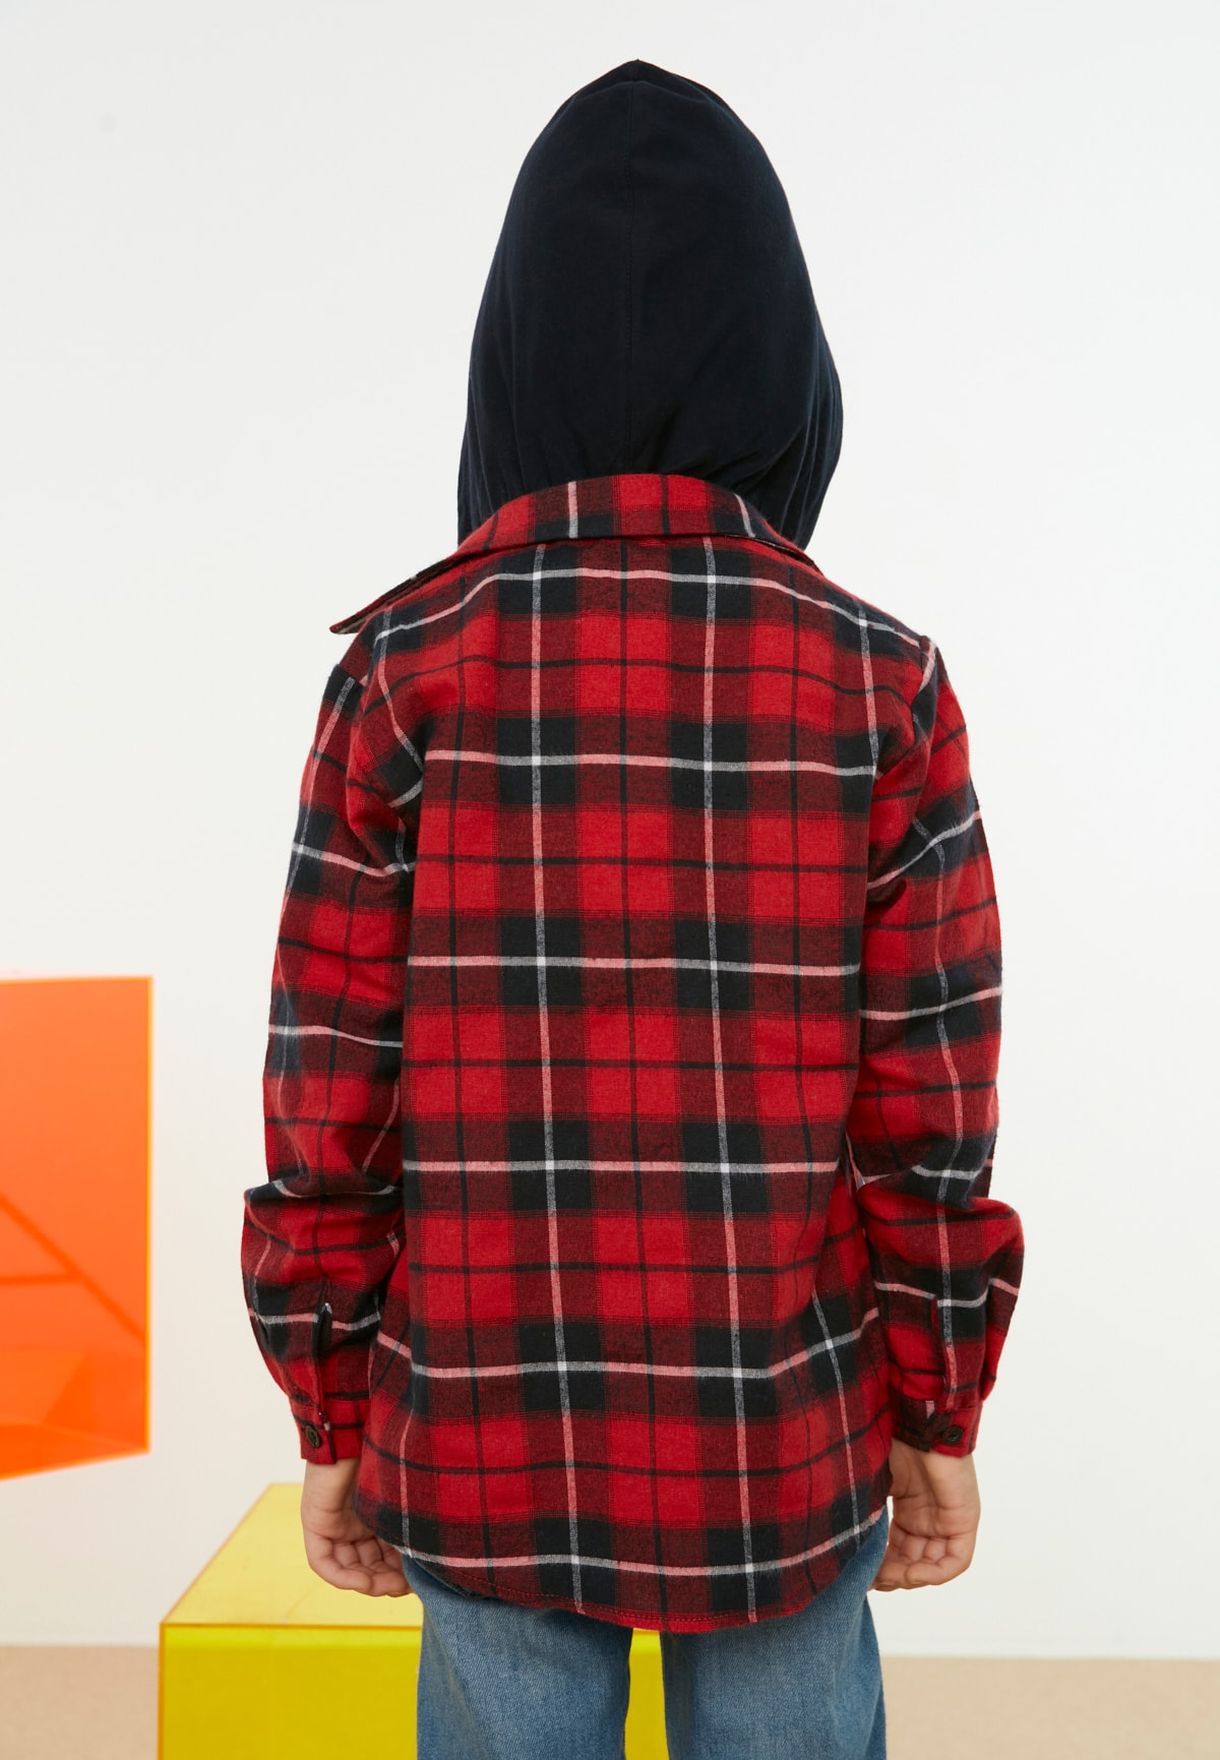 Kids Checked Hooded Shirt